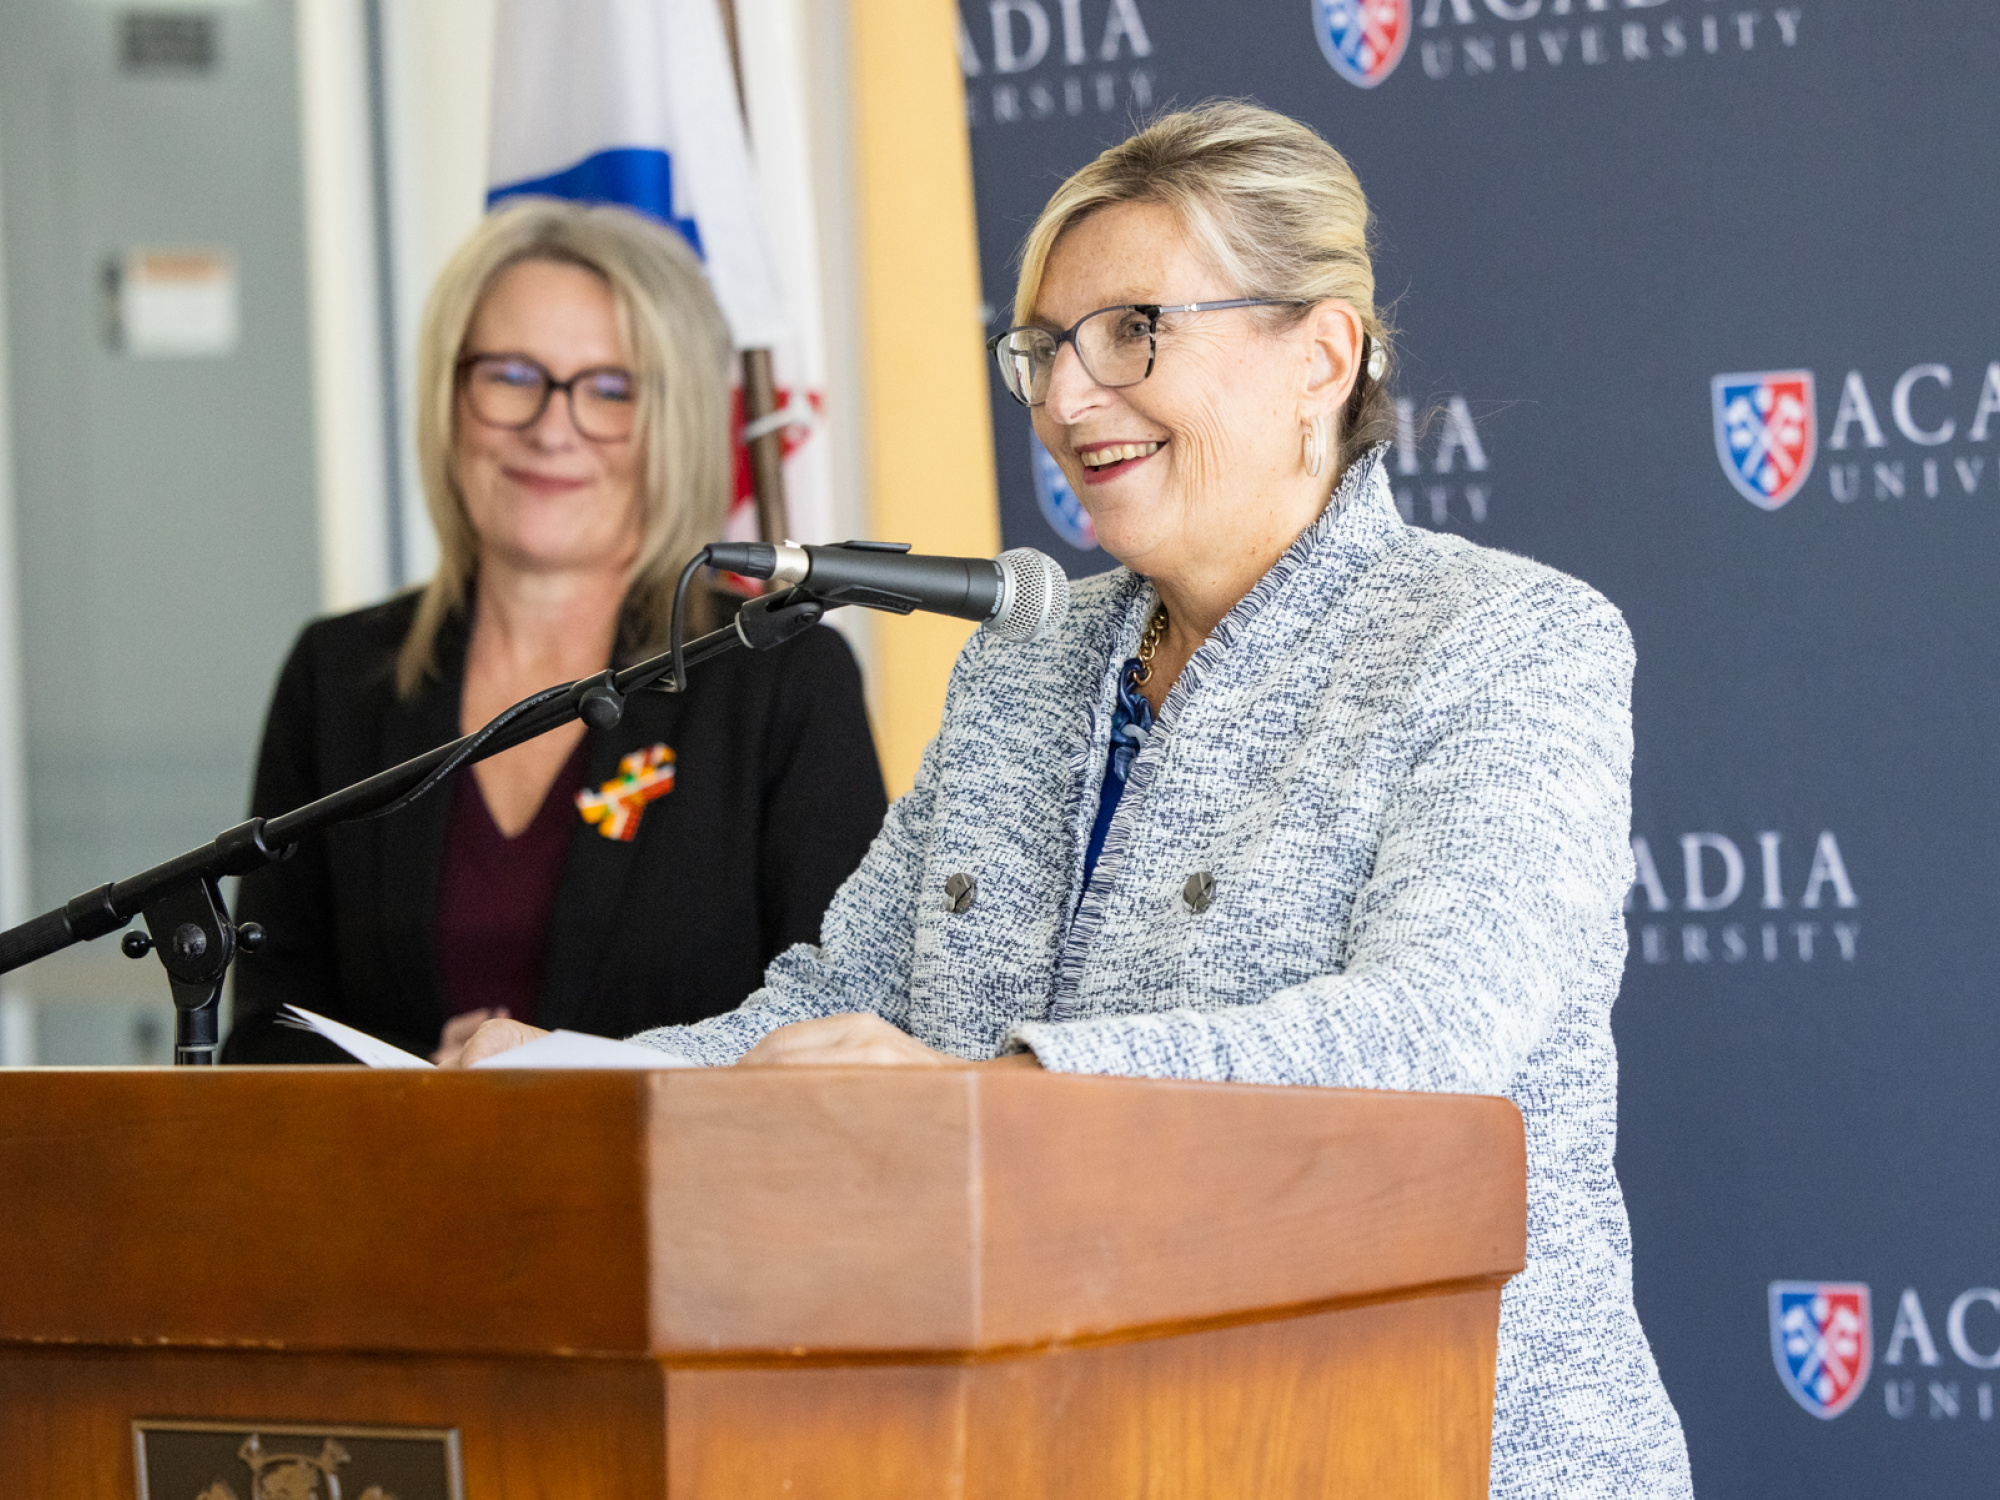 Barbara Adams, Minister for Seniors and Long-term Care, announces the Province’s investment in a new nurse training facility at Acadia University that will open by 2026-27.